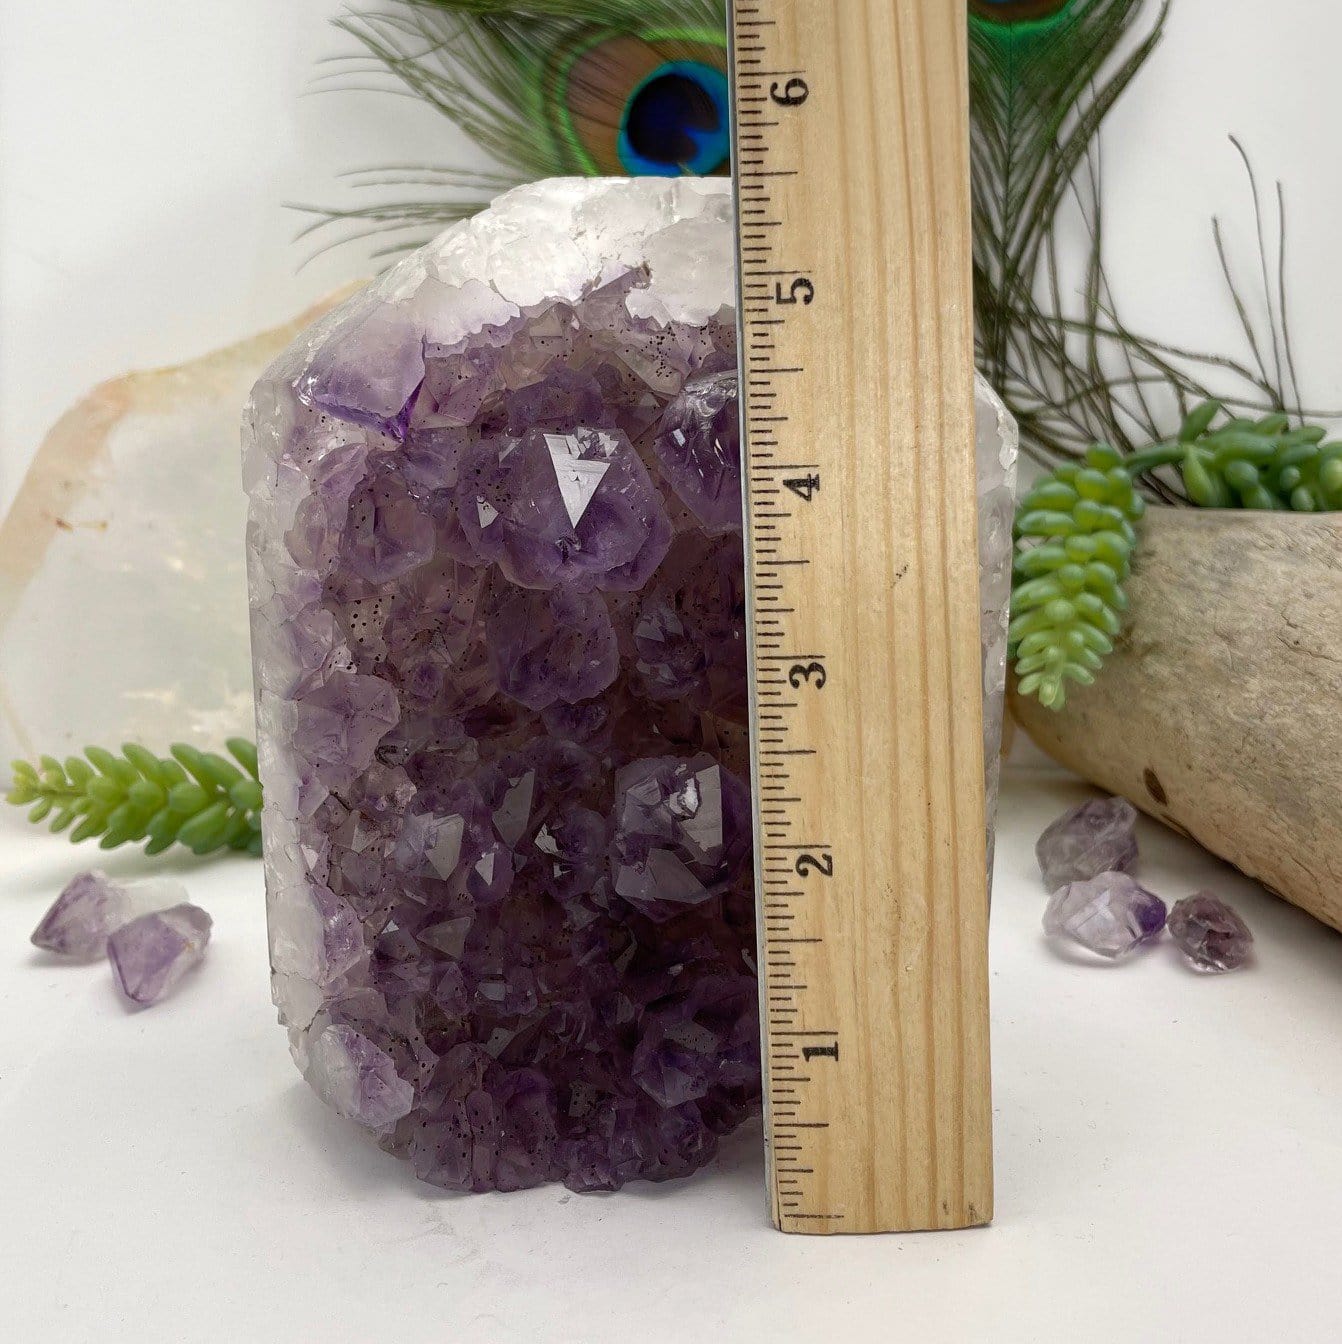 Amethyst Crystal Cluster Polished Point next to a ruler for size reference